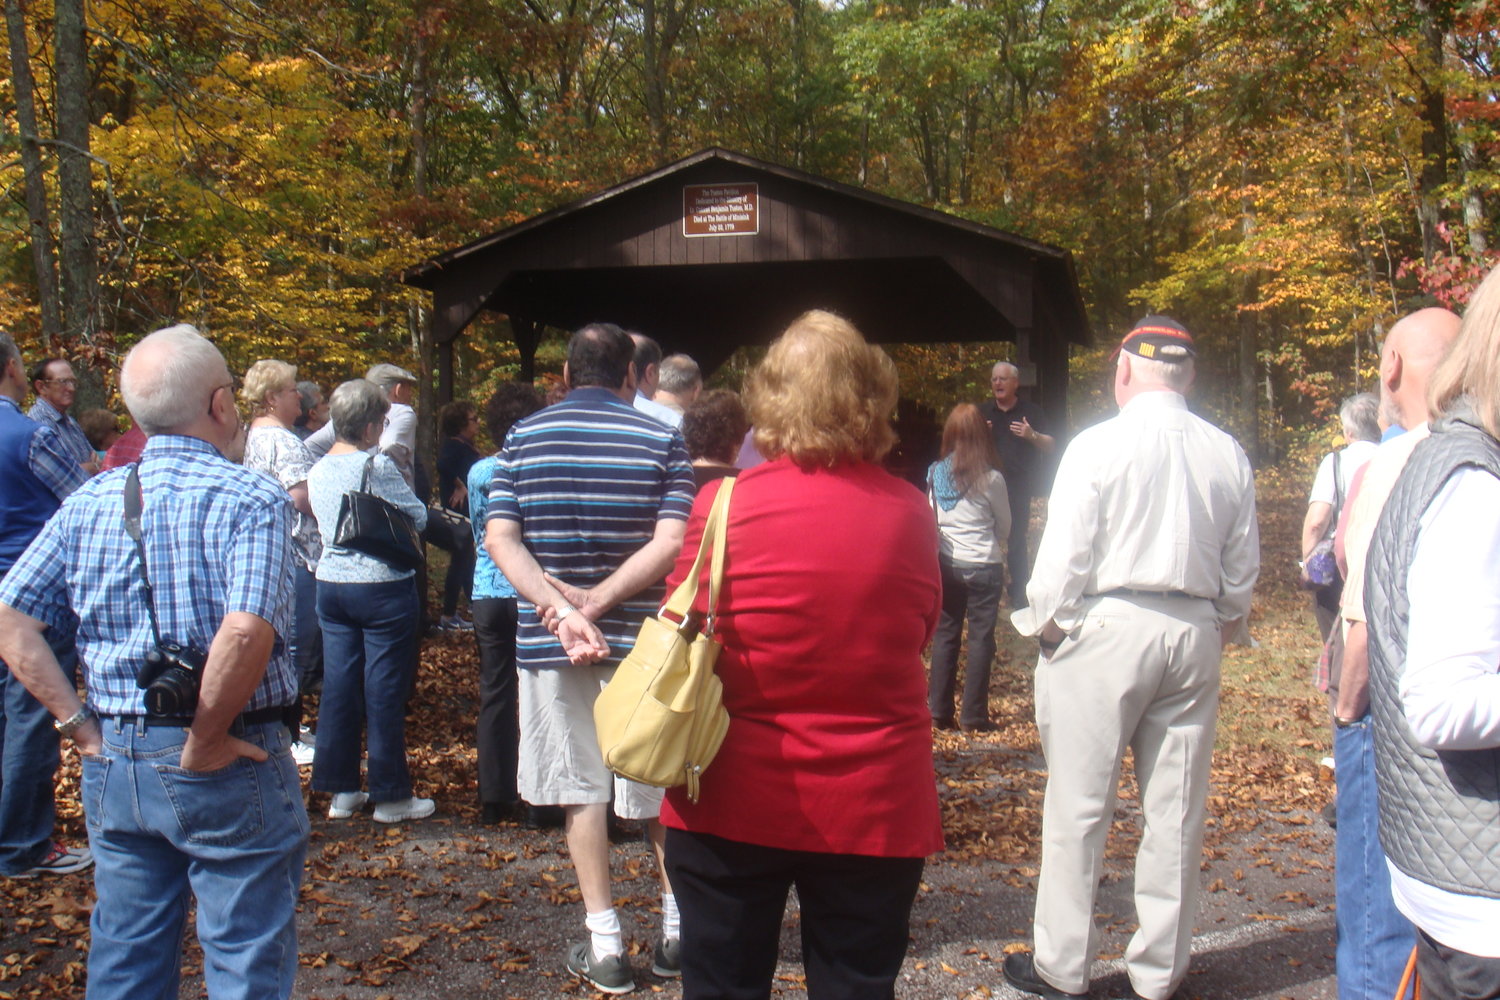 The history hike at the Minisink Battleground Park will leave from the Tusten Pavilion in the Park at 1 p.m. on Saturday, November 12.